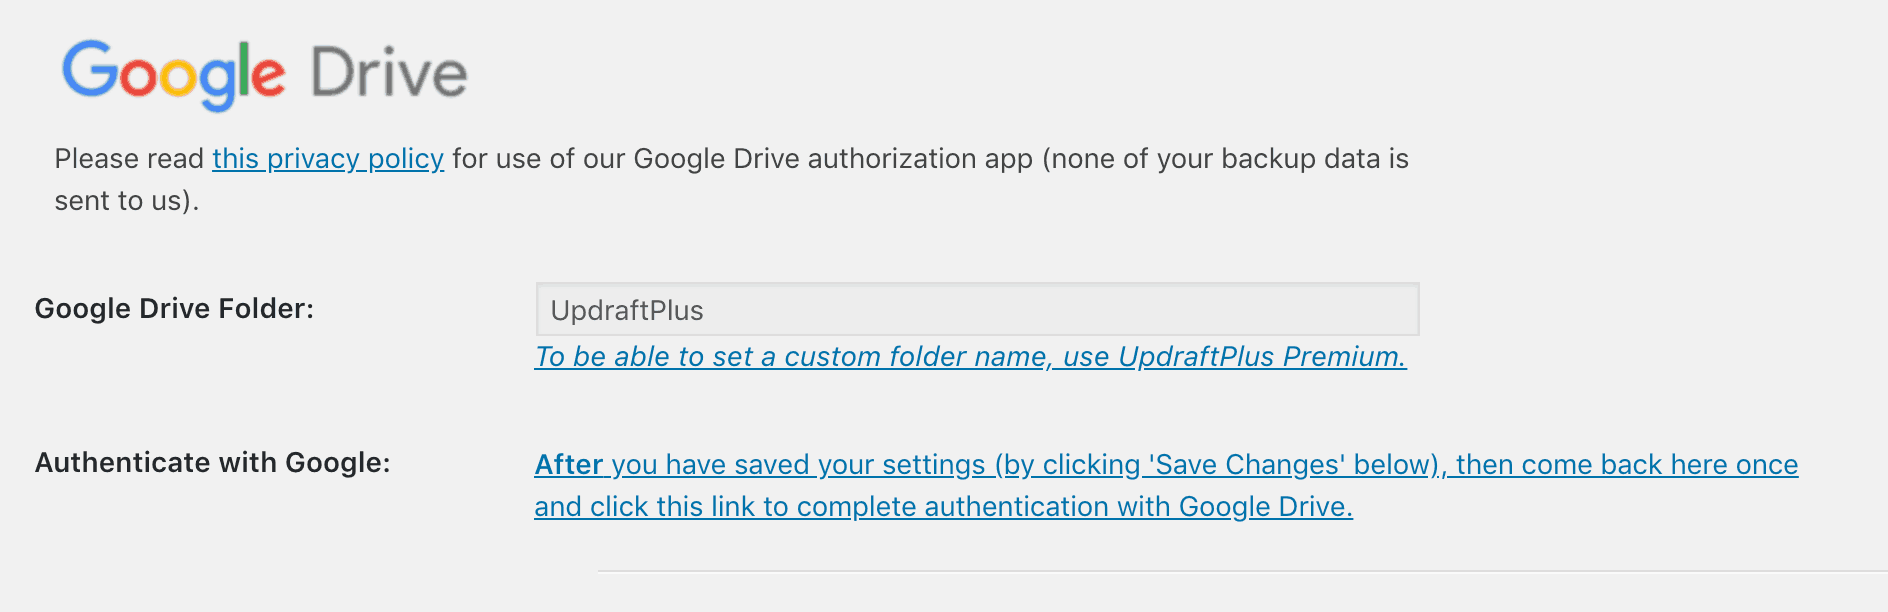 Settings for connecting to Google Drive.